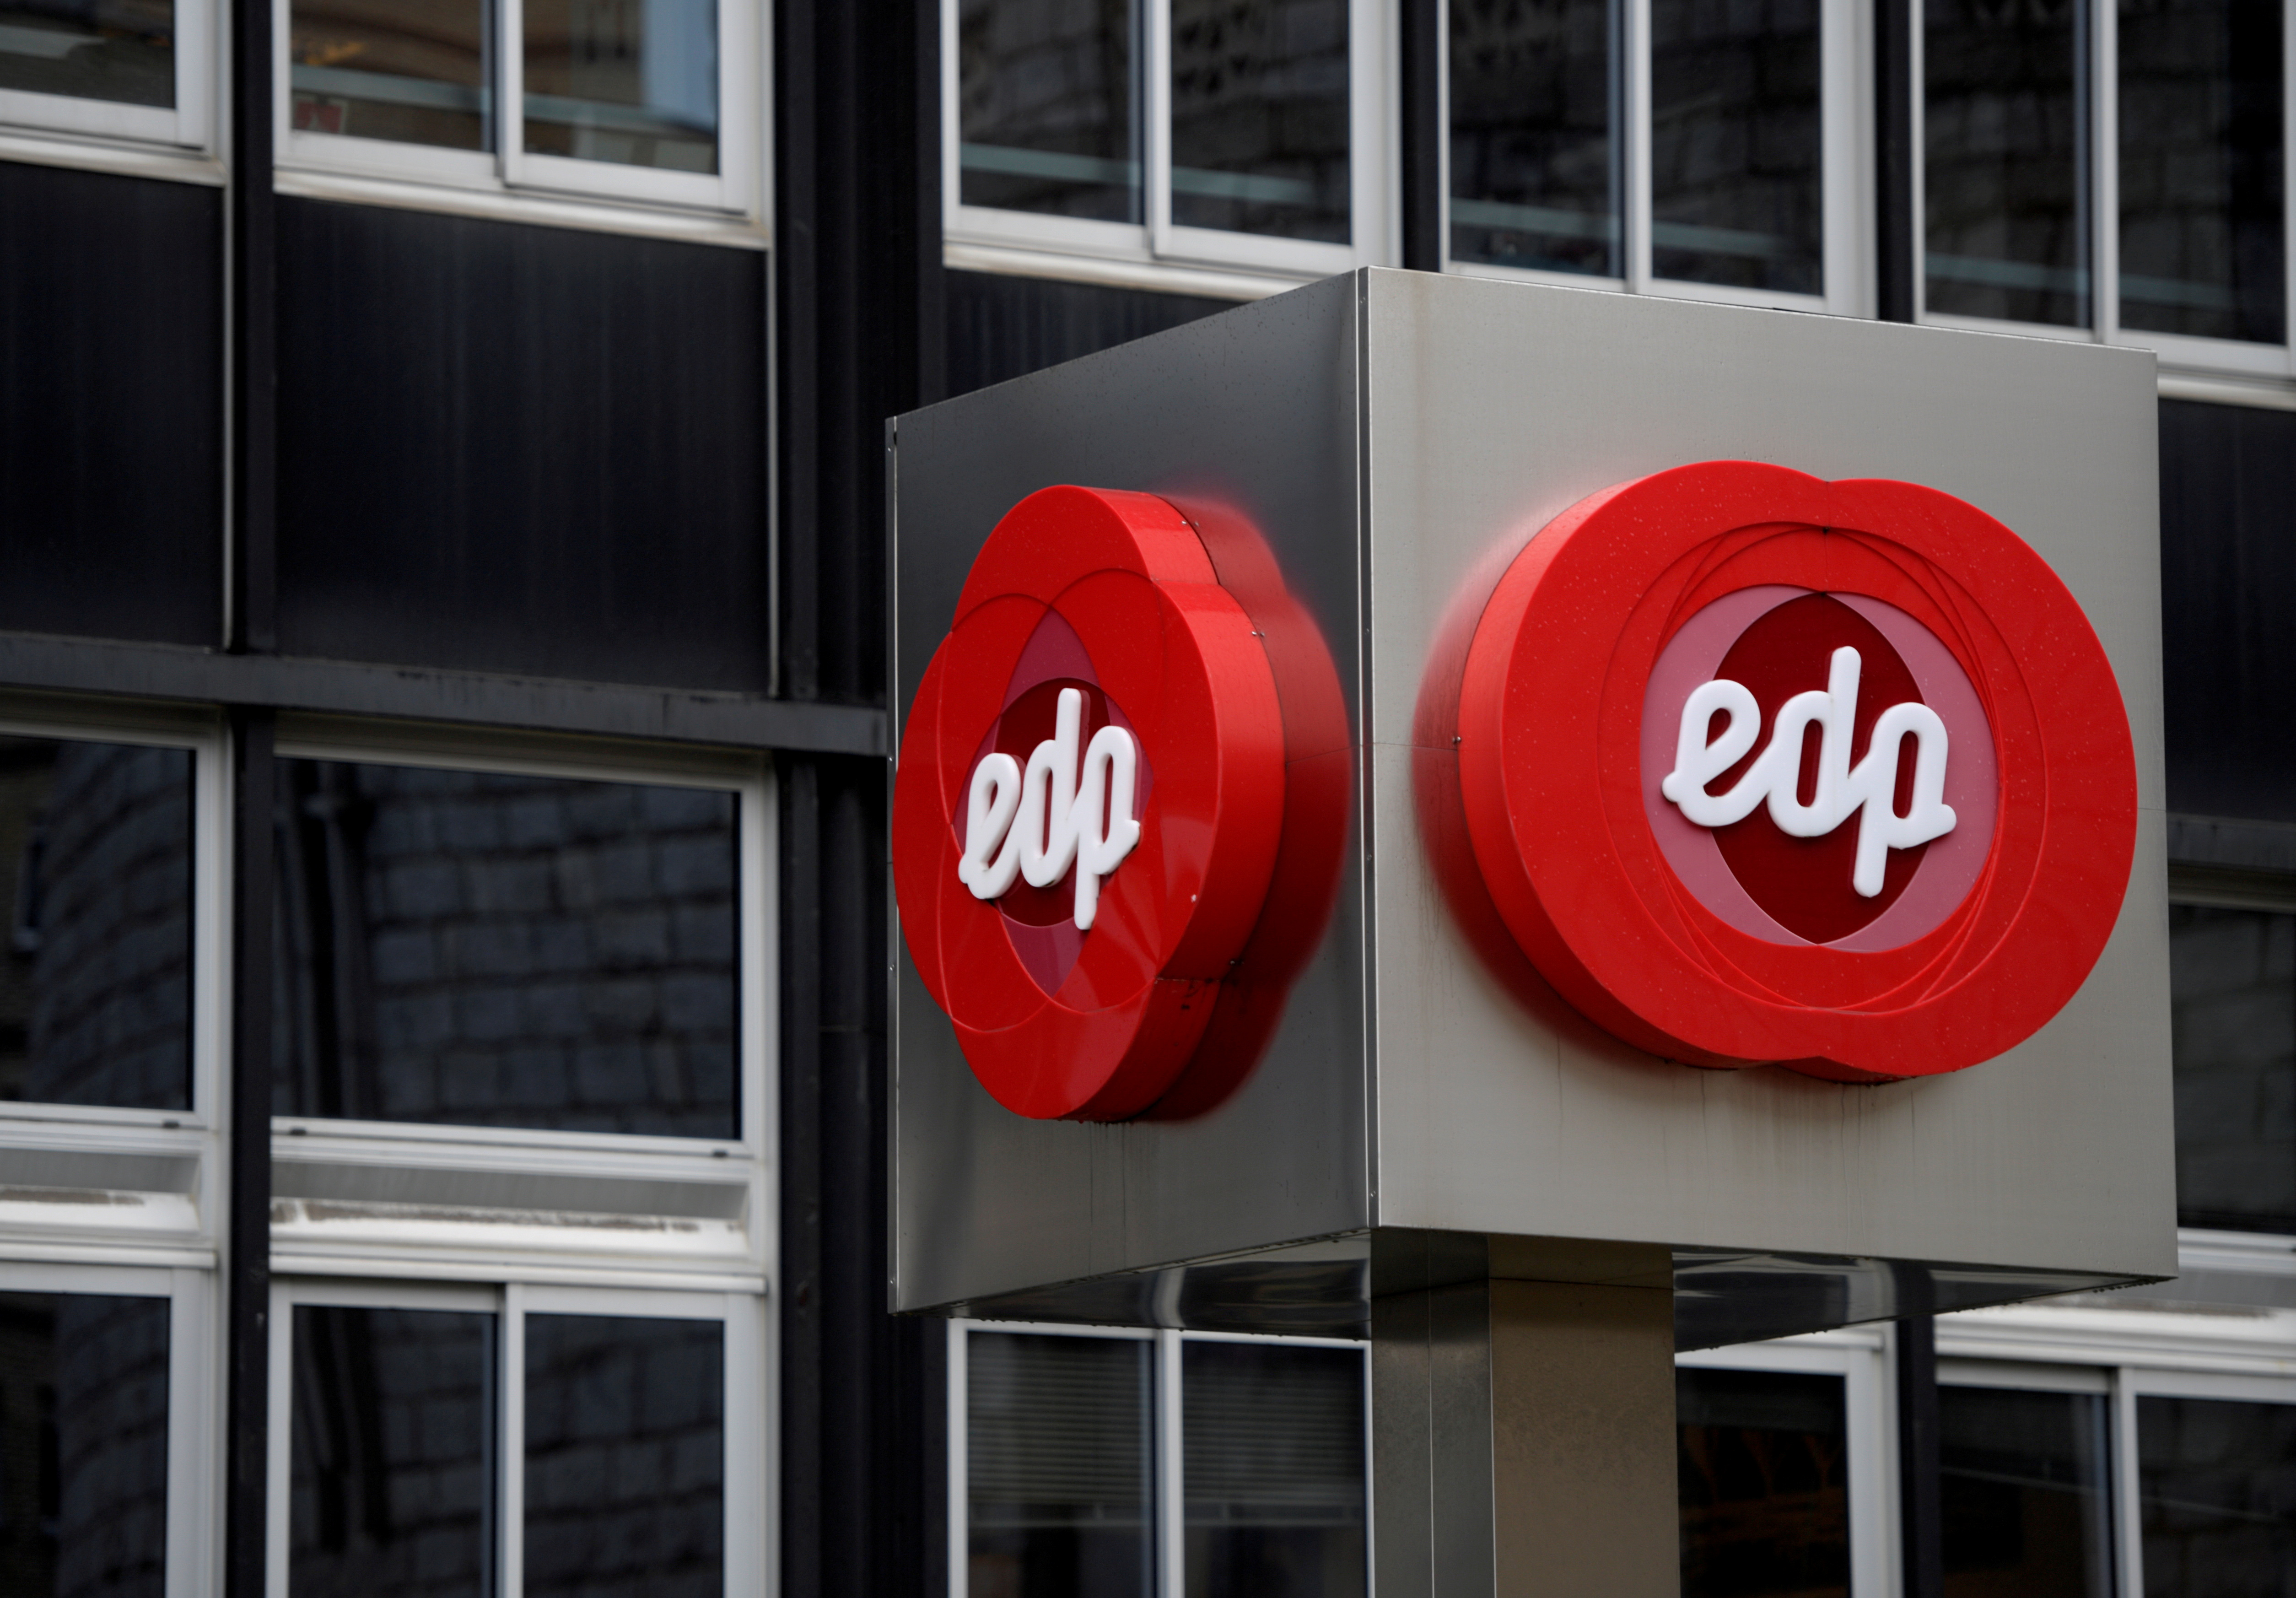 The logo of Portuguese utility company EDP - Energias de Portugal is seen at the company's offices in Oviedo, Spain, May 14, 2018.  REUTERS/Eloy Alonso/File Photo